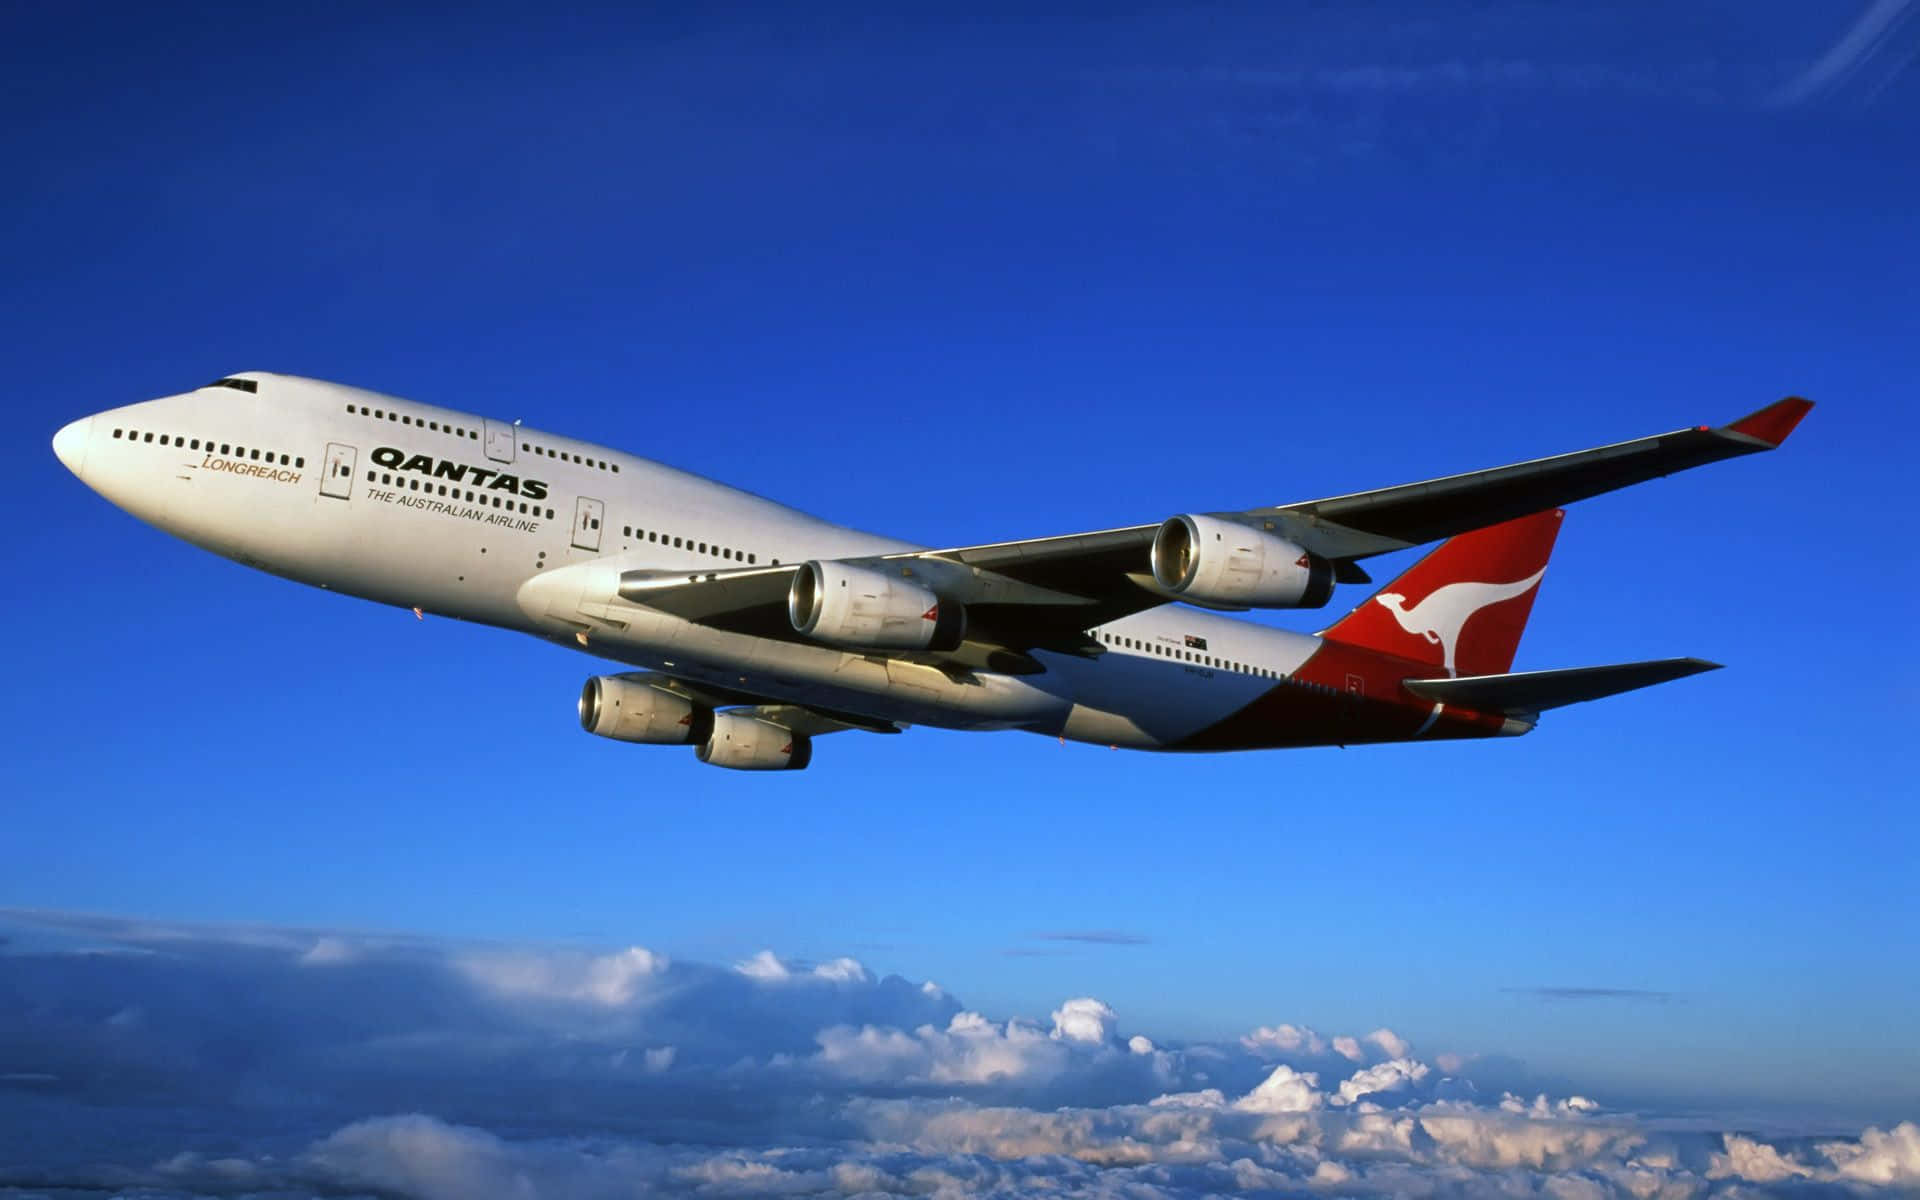 A 747 commercial airplane taking off Wallpaper